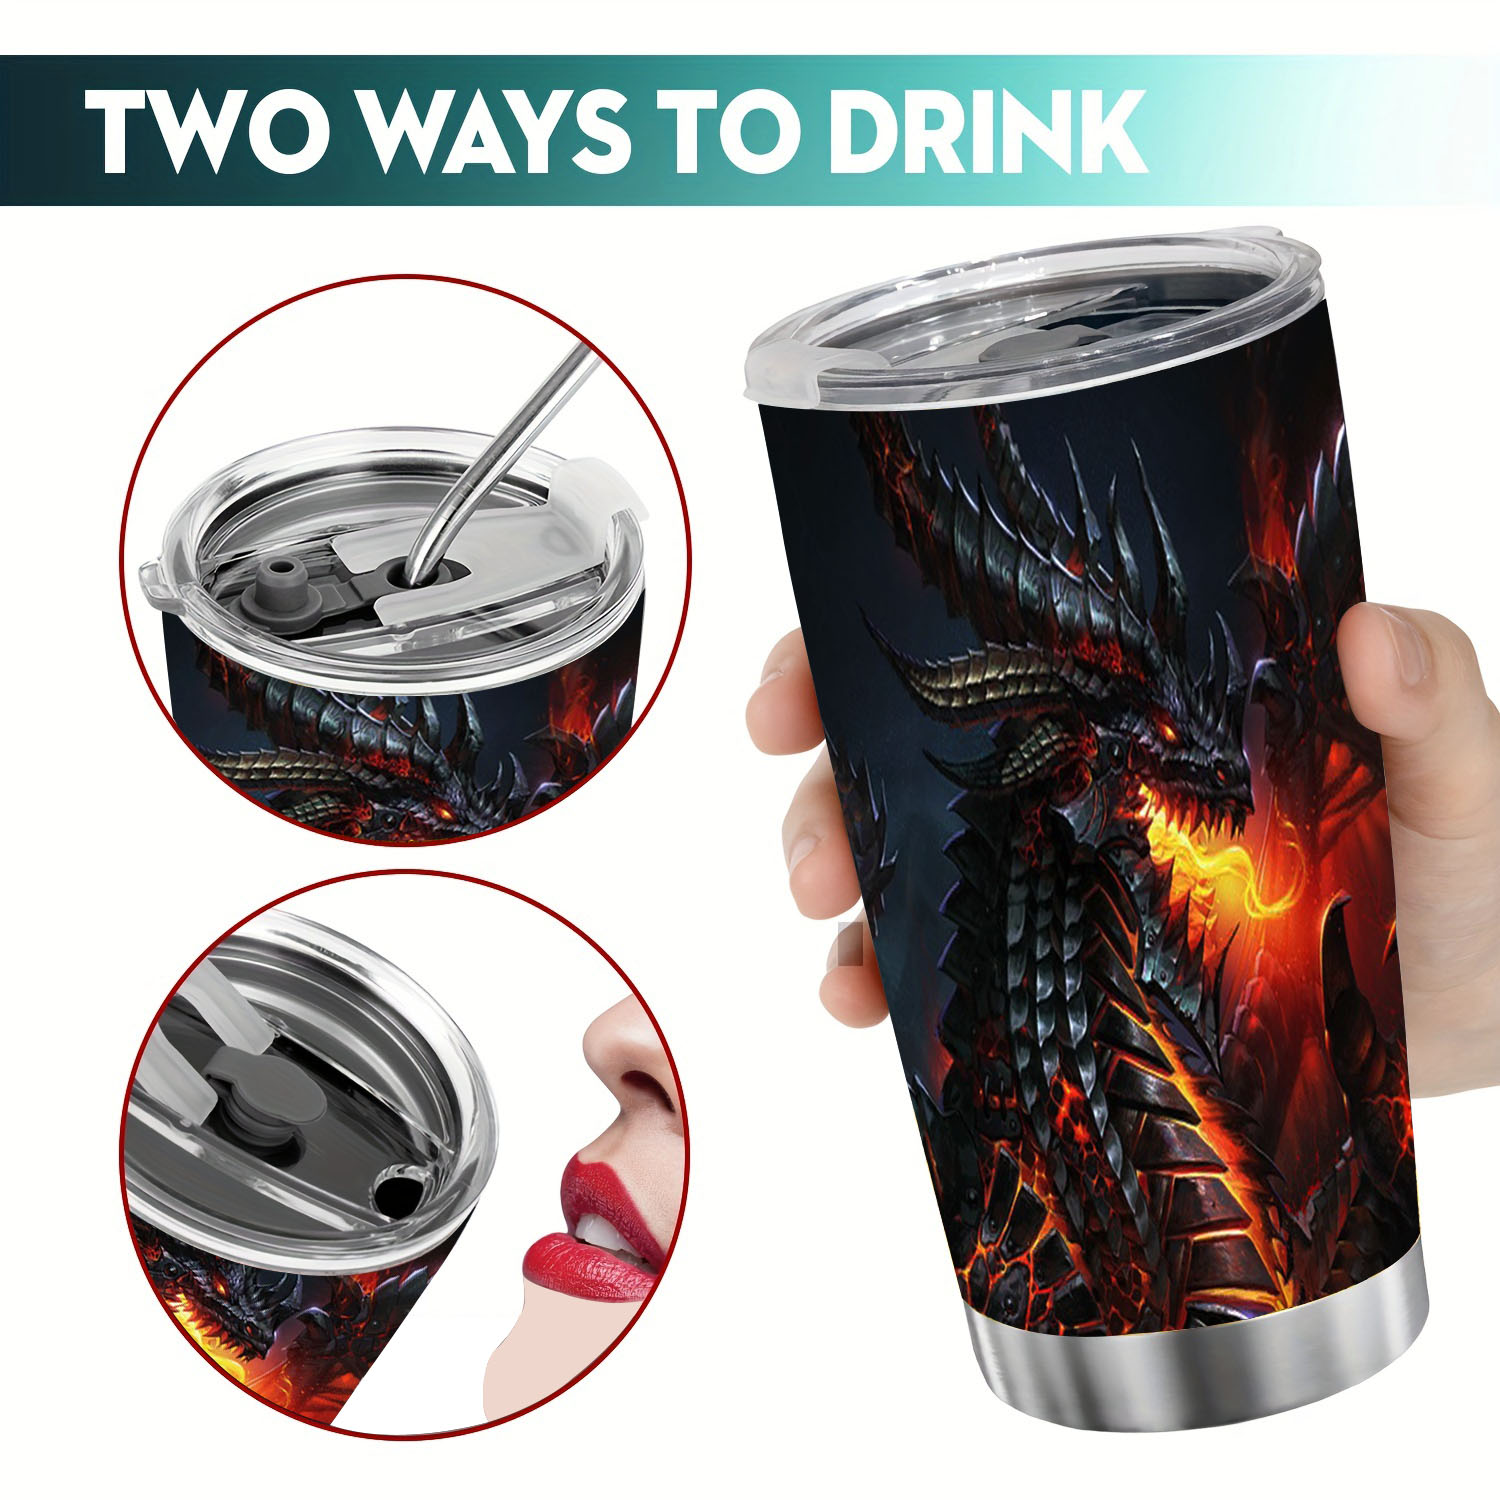 

1pc 590ml/20oz Black Dragon Printed Travel Mug, Stainless Steel Vacuum Insulated Coffee Cup, Portable Double Wall Bottle With Lid For Outdoor Sports, Fitness